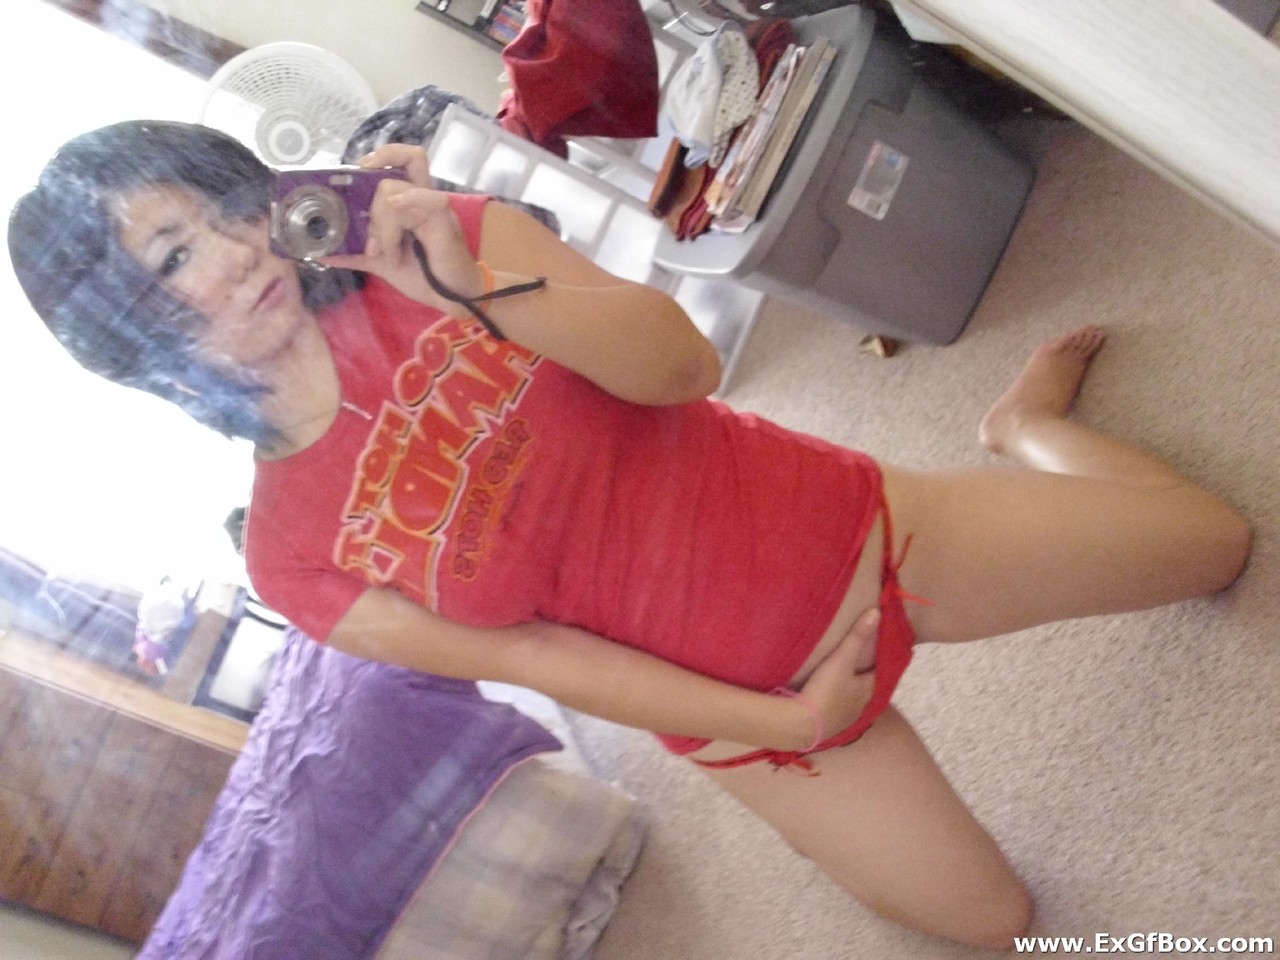 Bootylicious teenage girlfriend takes selfies of her hot body while stripping foto porno #426010453 | Ex GF Box Pics, Selfie, porno mobile